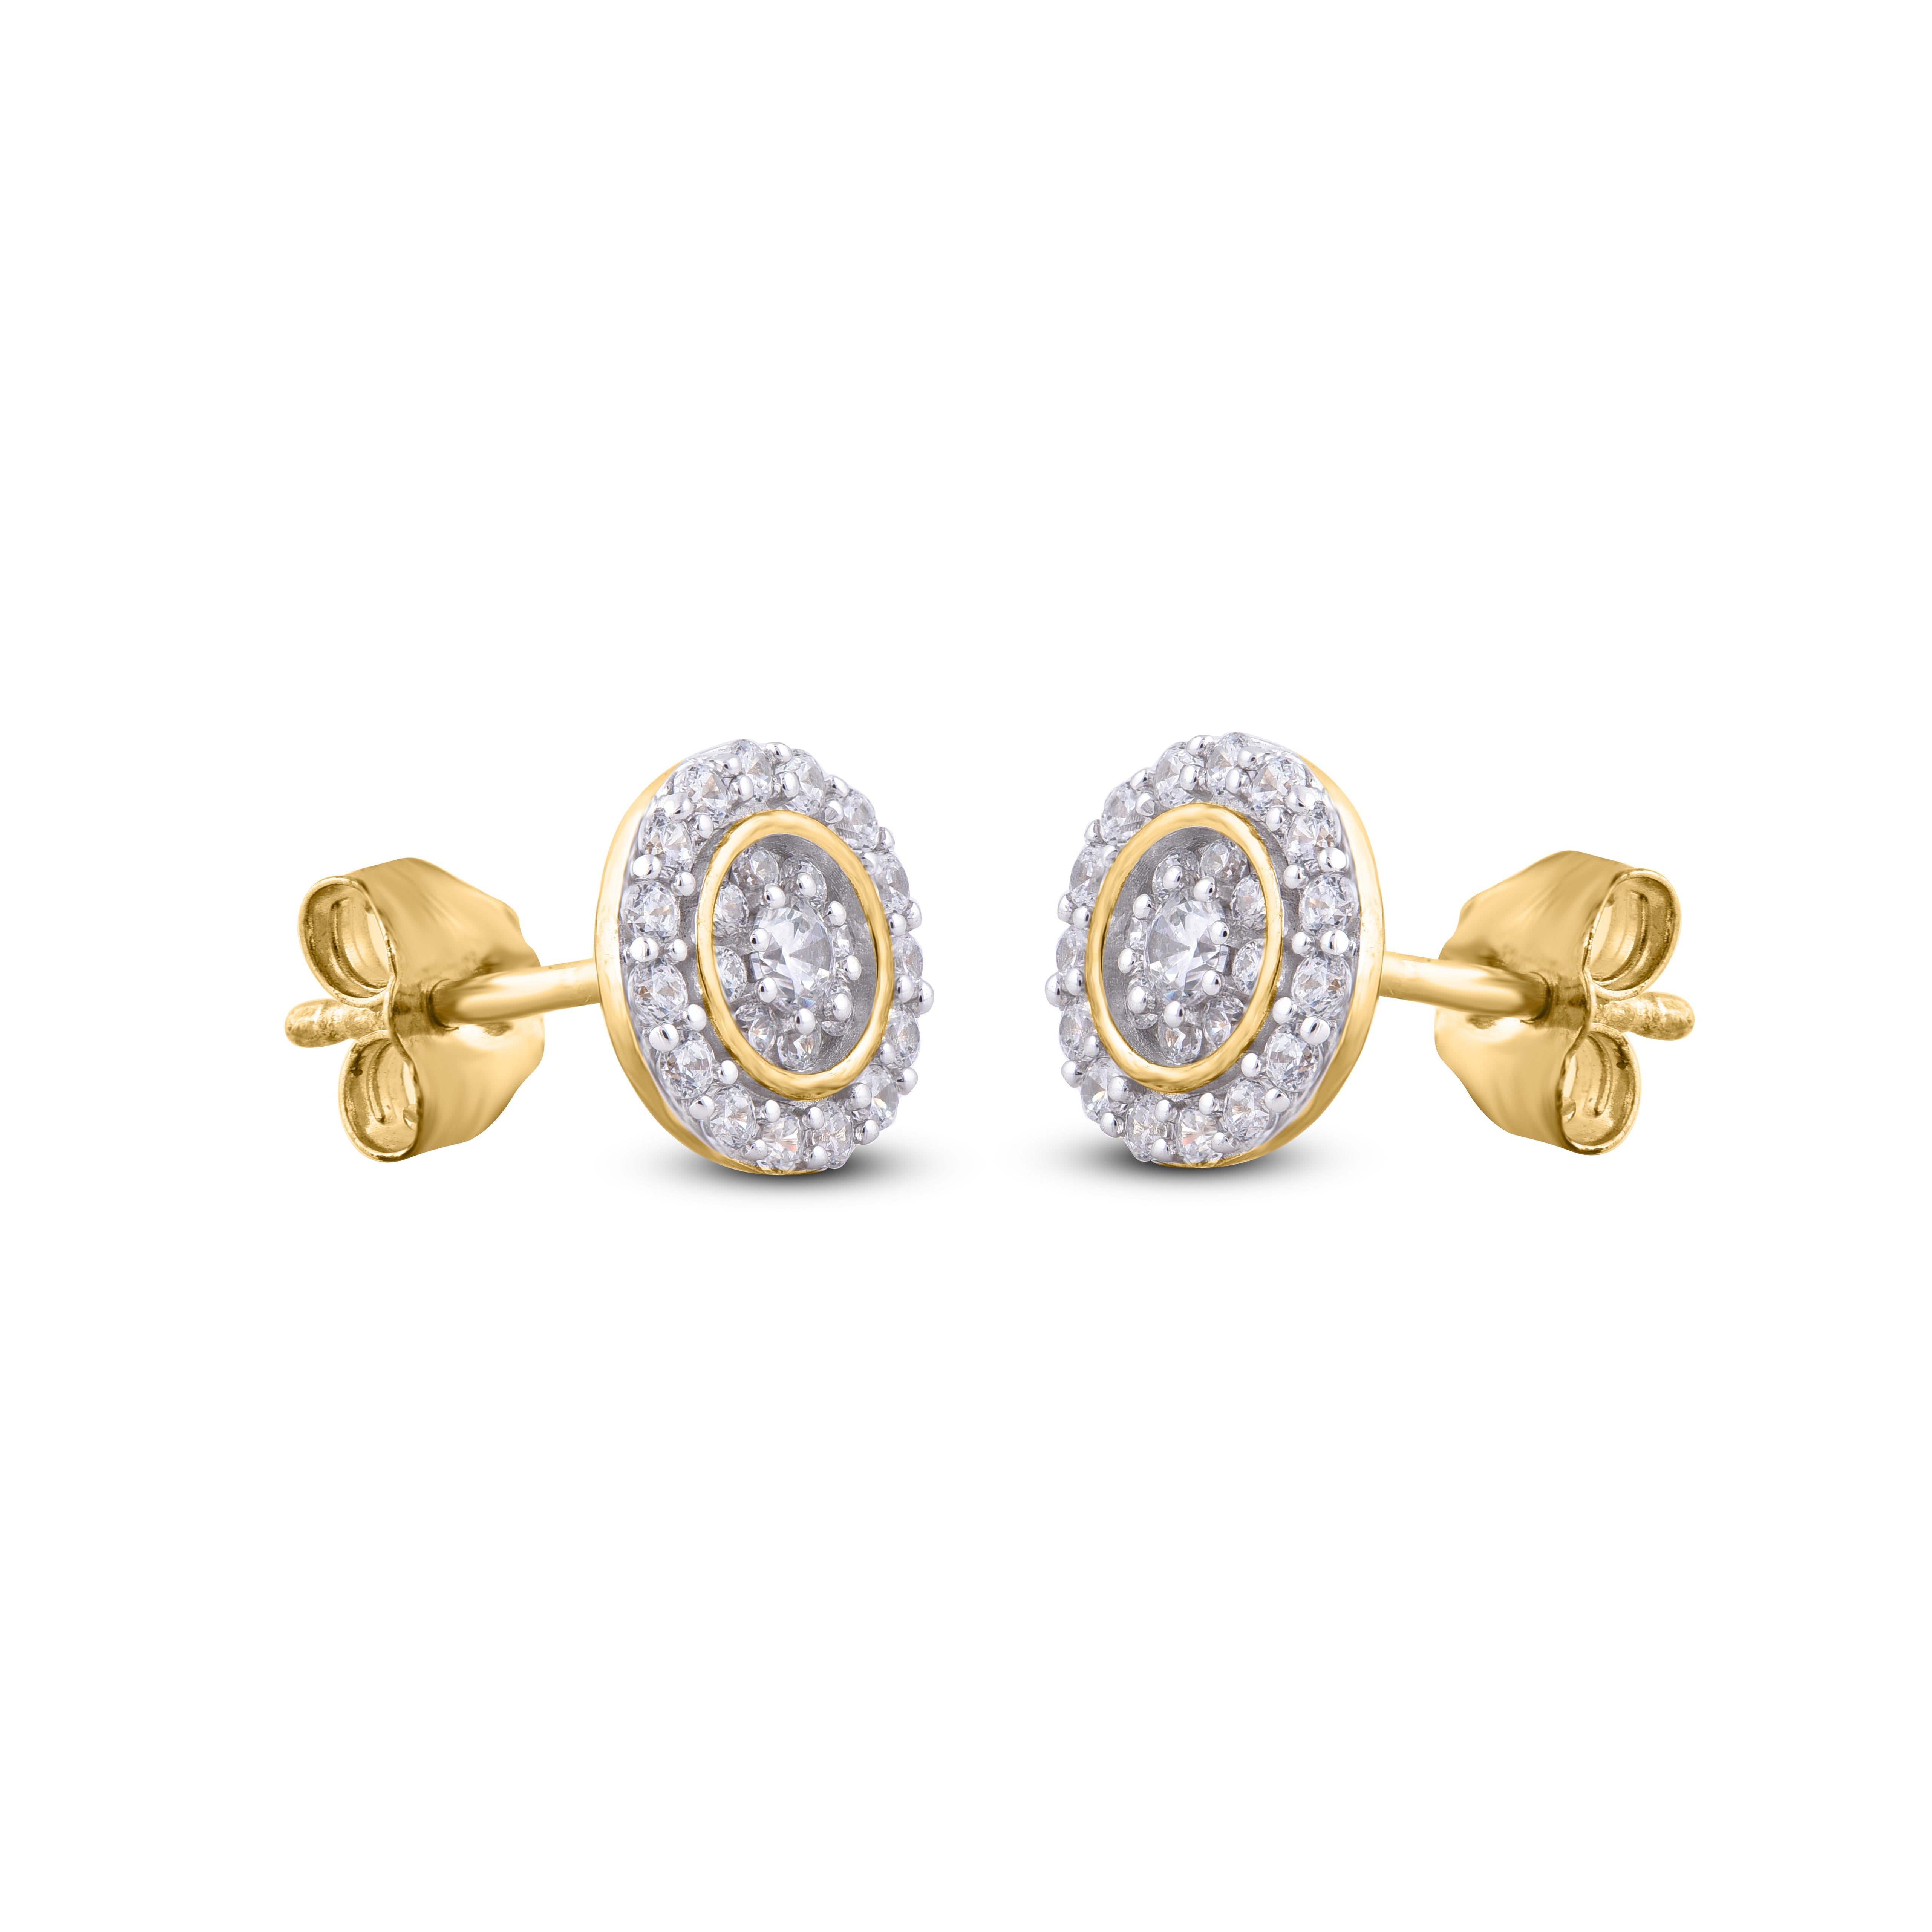 Round Cut TJD 0.50 Carat Round Diamond 14K Yellow Gold Round Frame Fashion Stud Earrings For Sale